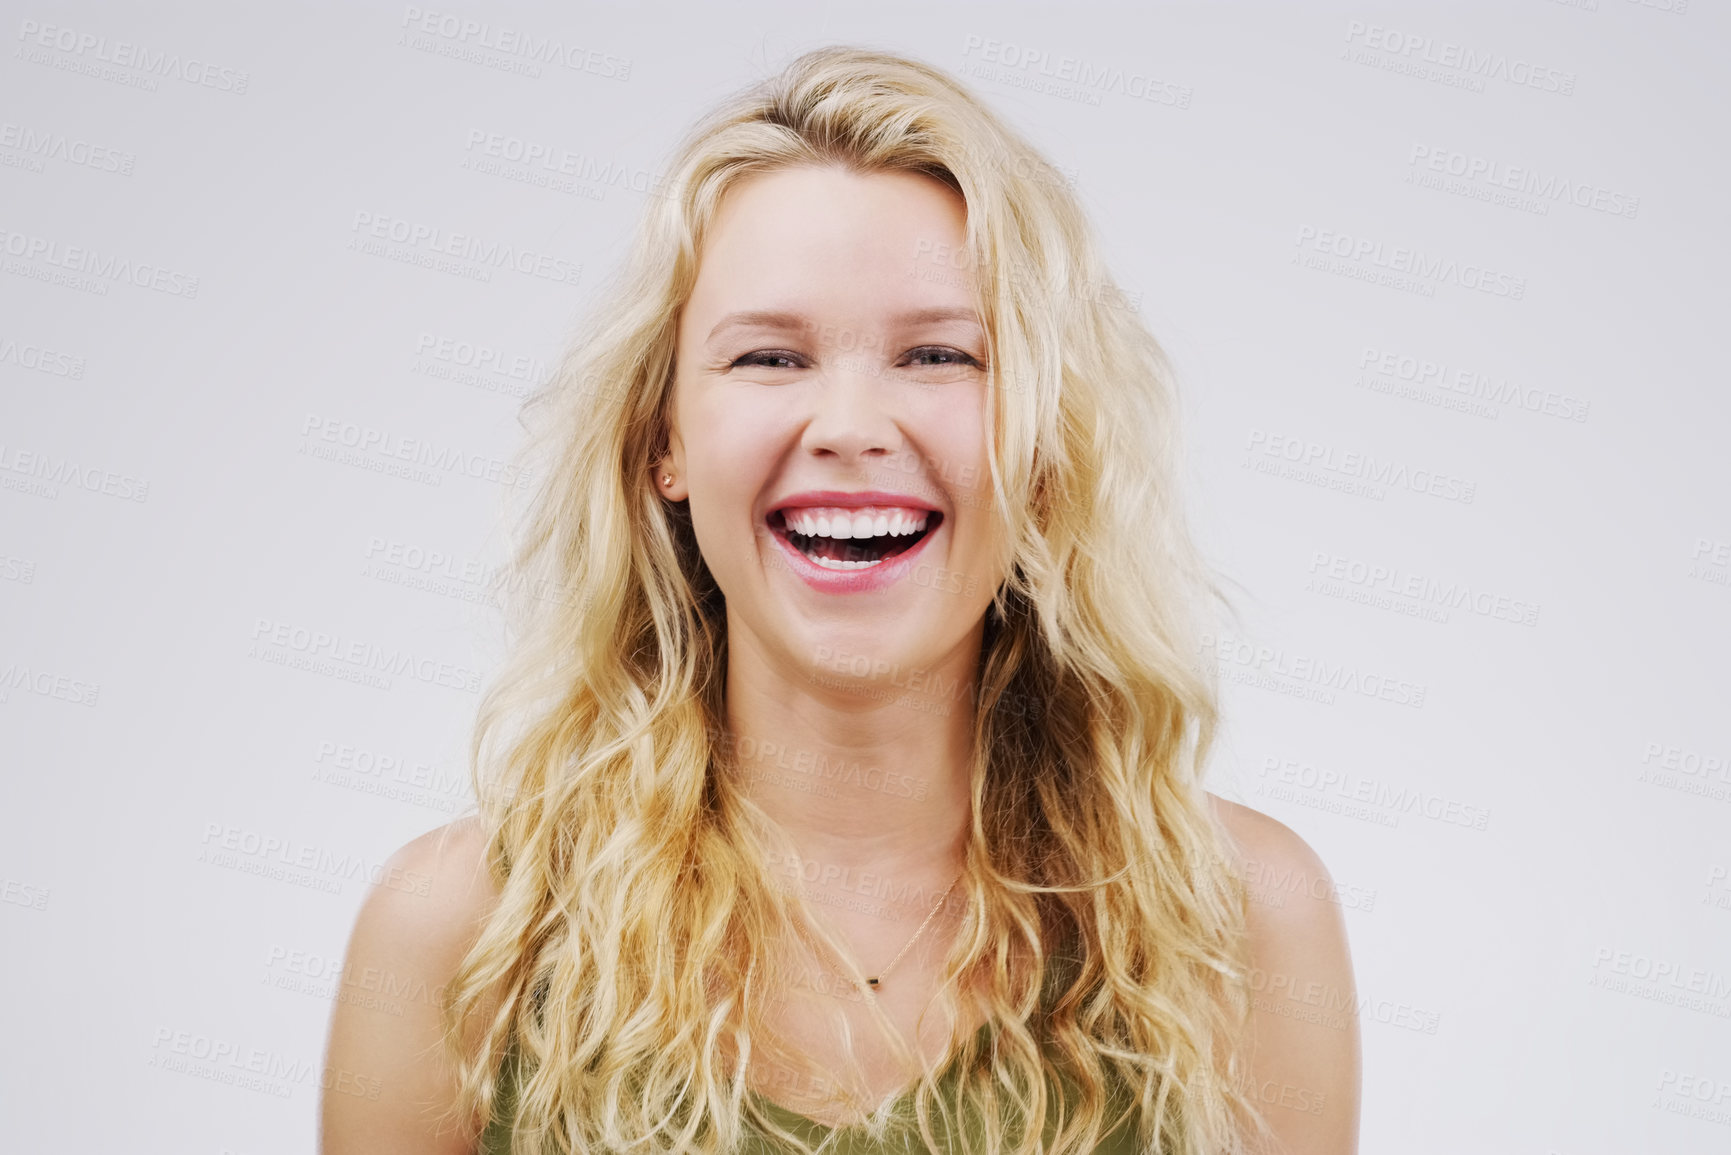 Buy stock photo Studio portrait of an attractive young woman laughing while standing against a grey background